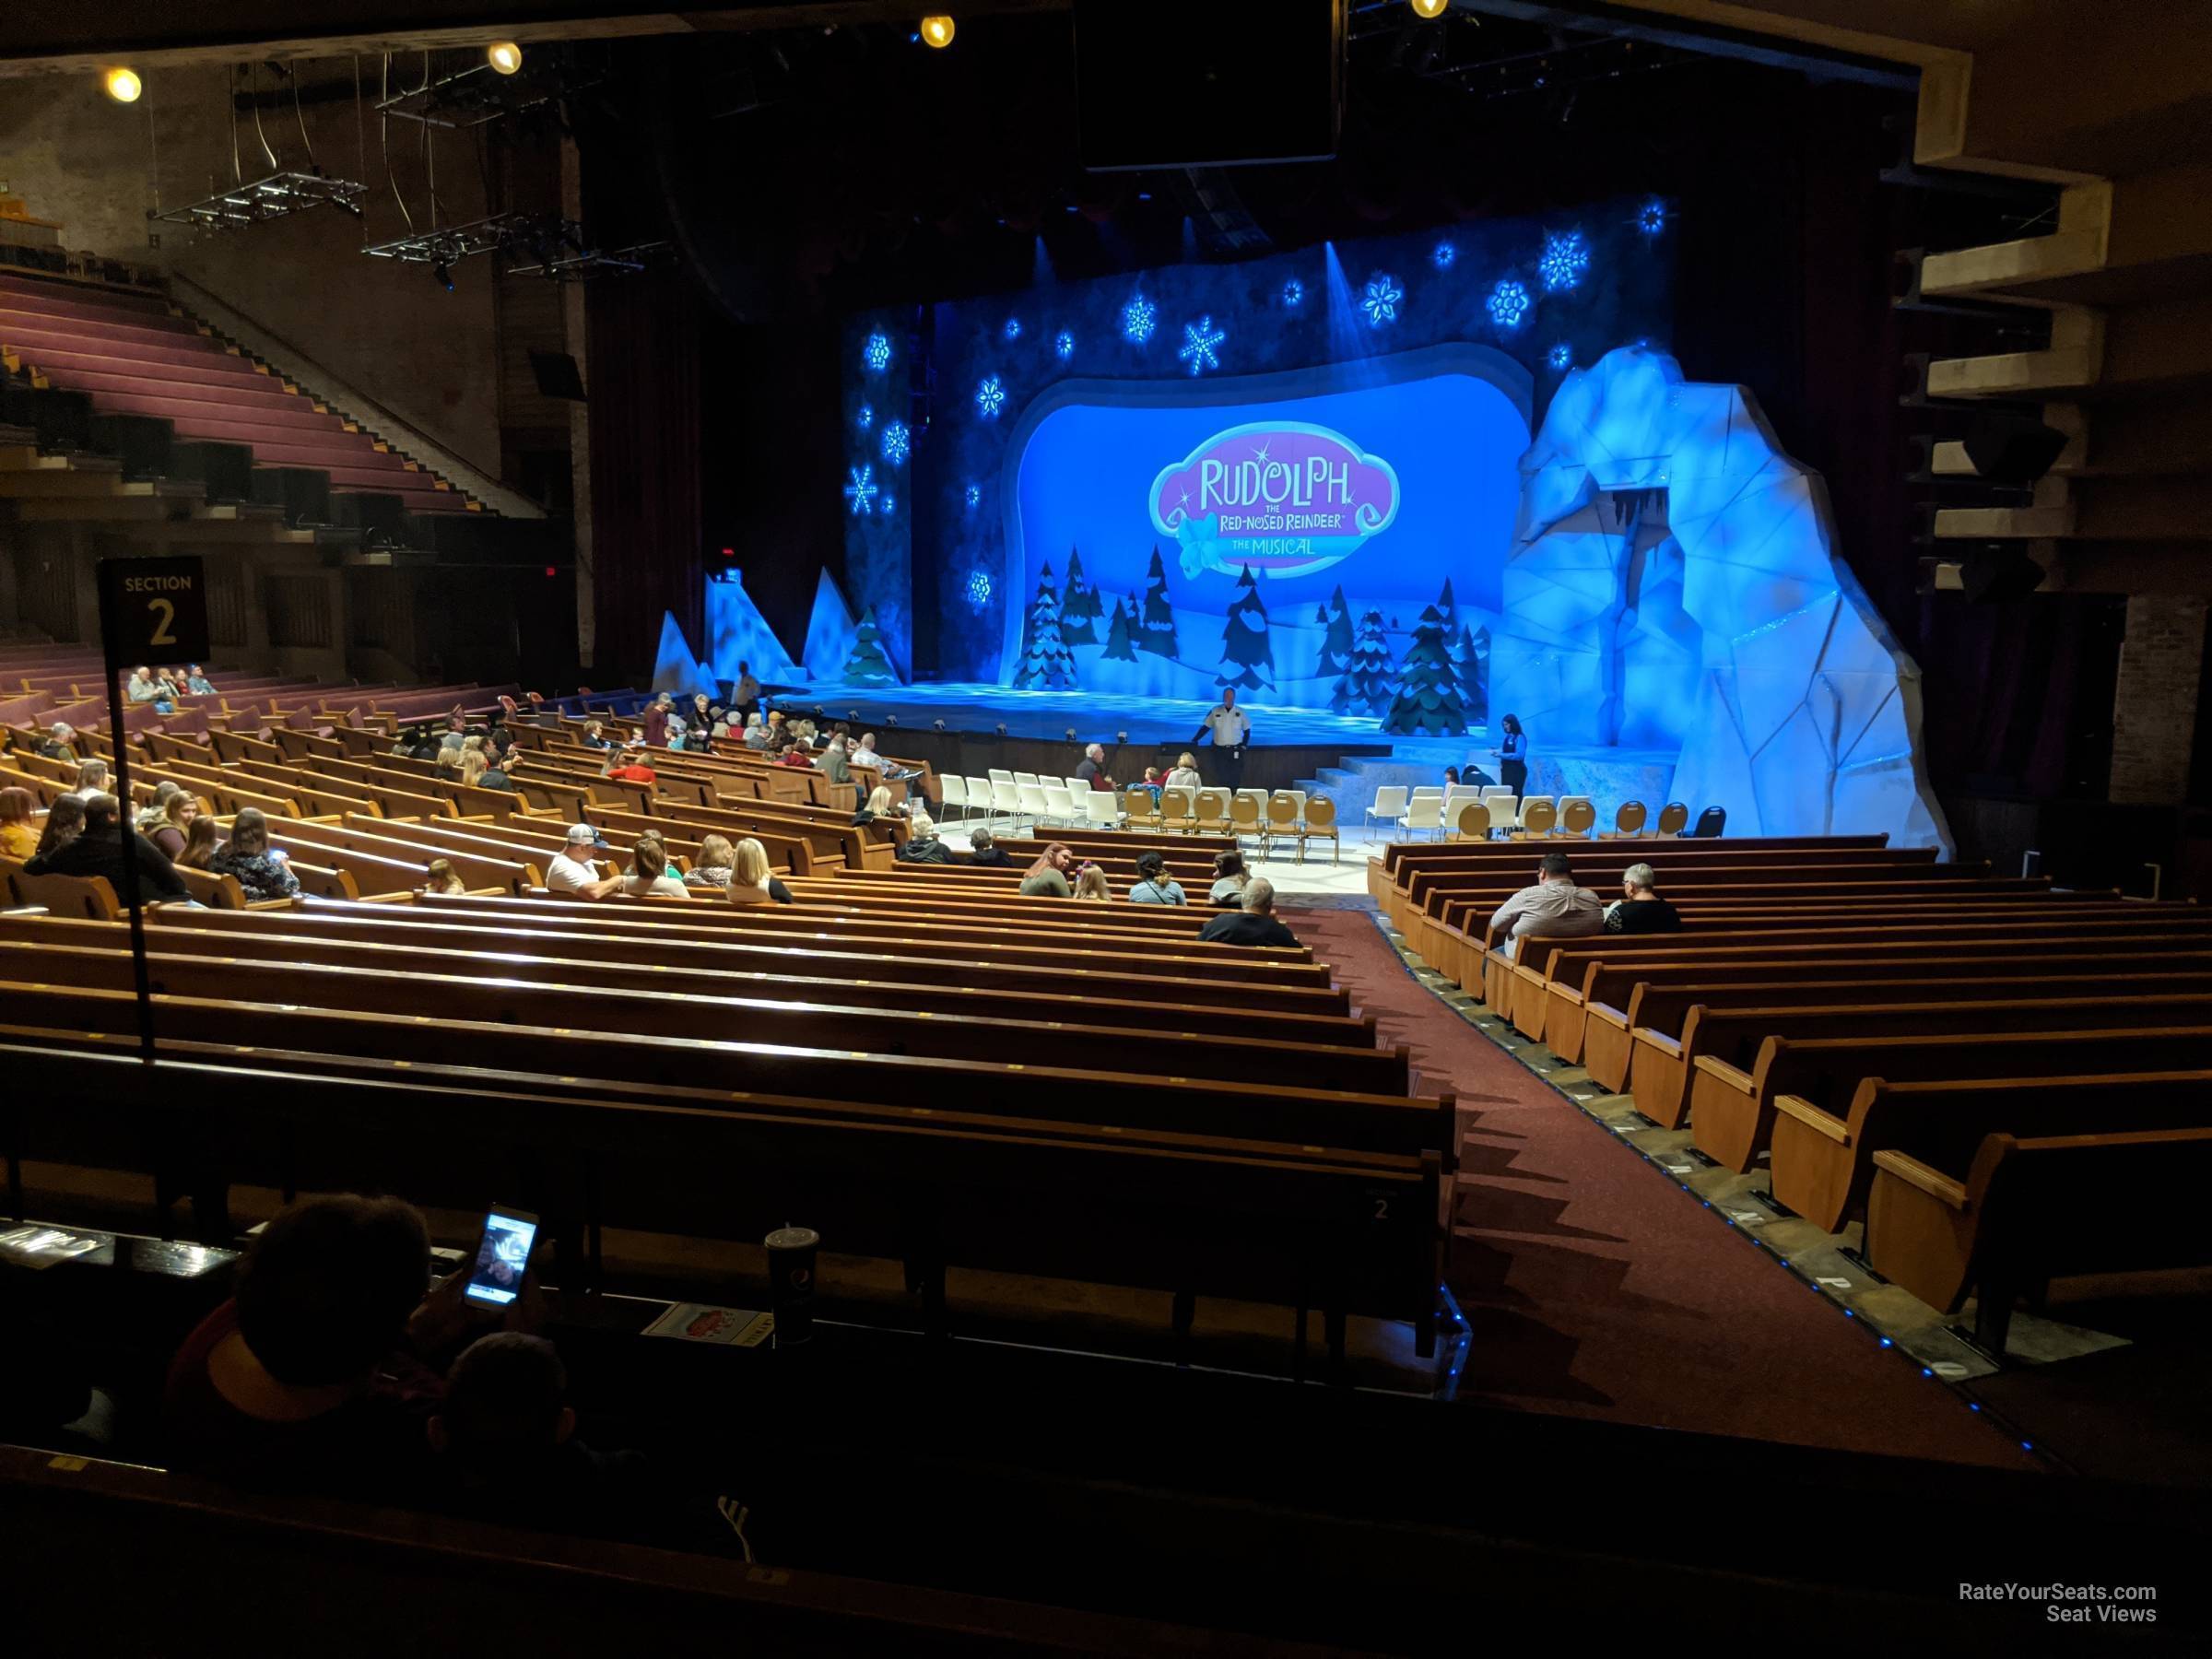 section 9, row v seat view  - grand ole opry house